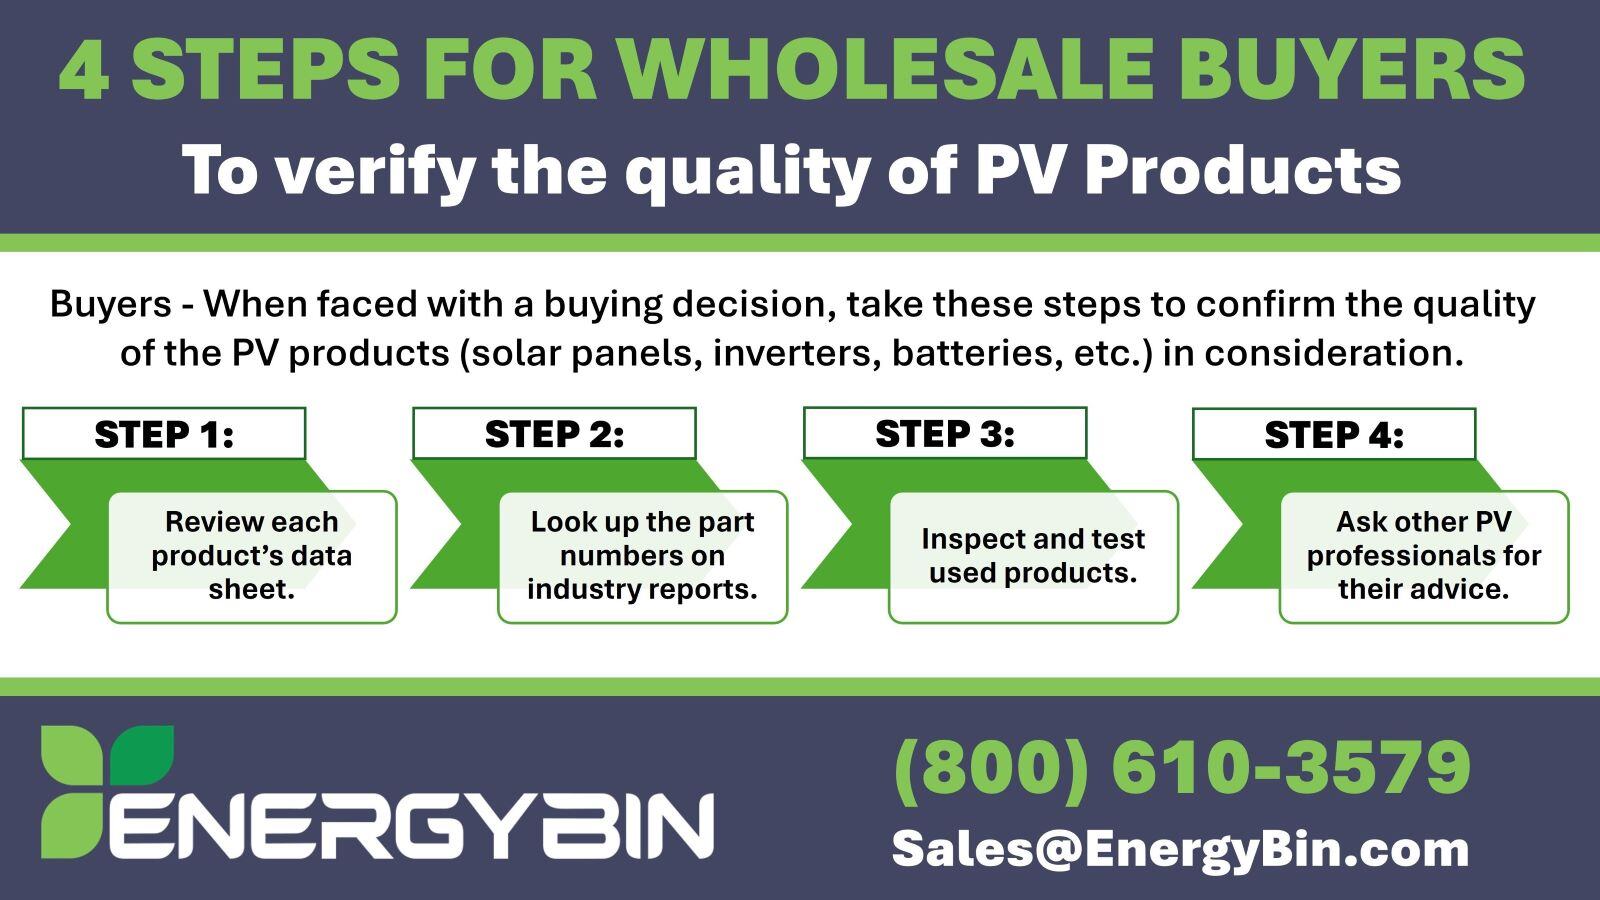 4 Steps for Wholesale Buyers to Verify the Quality of PV Products